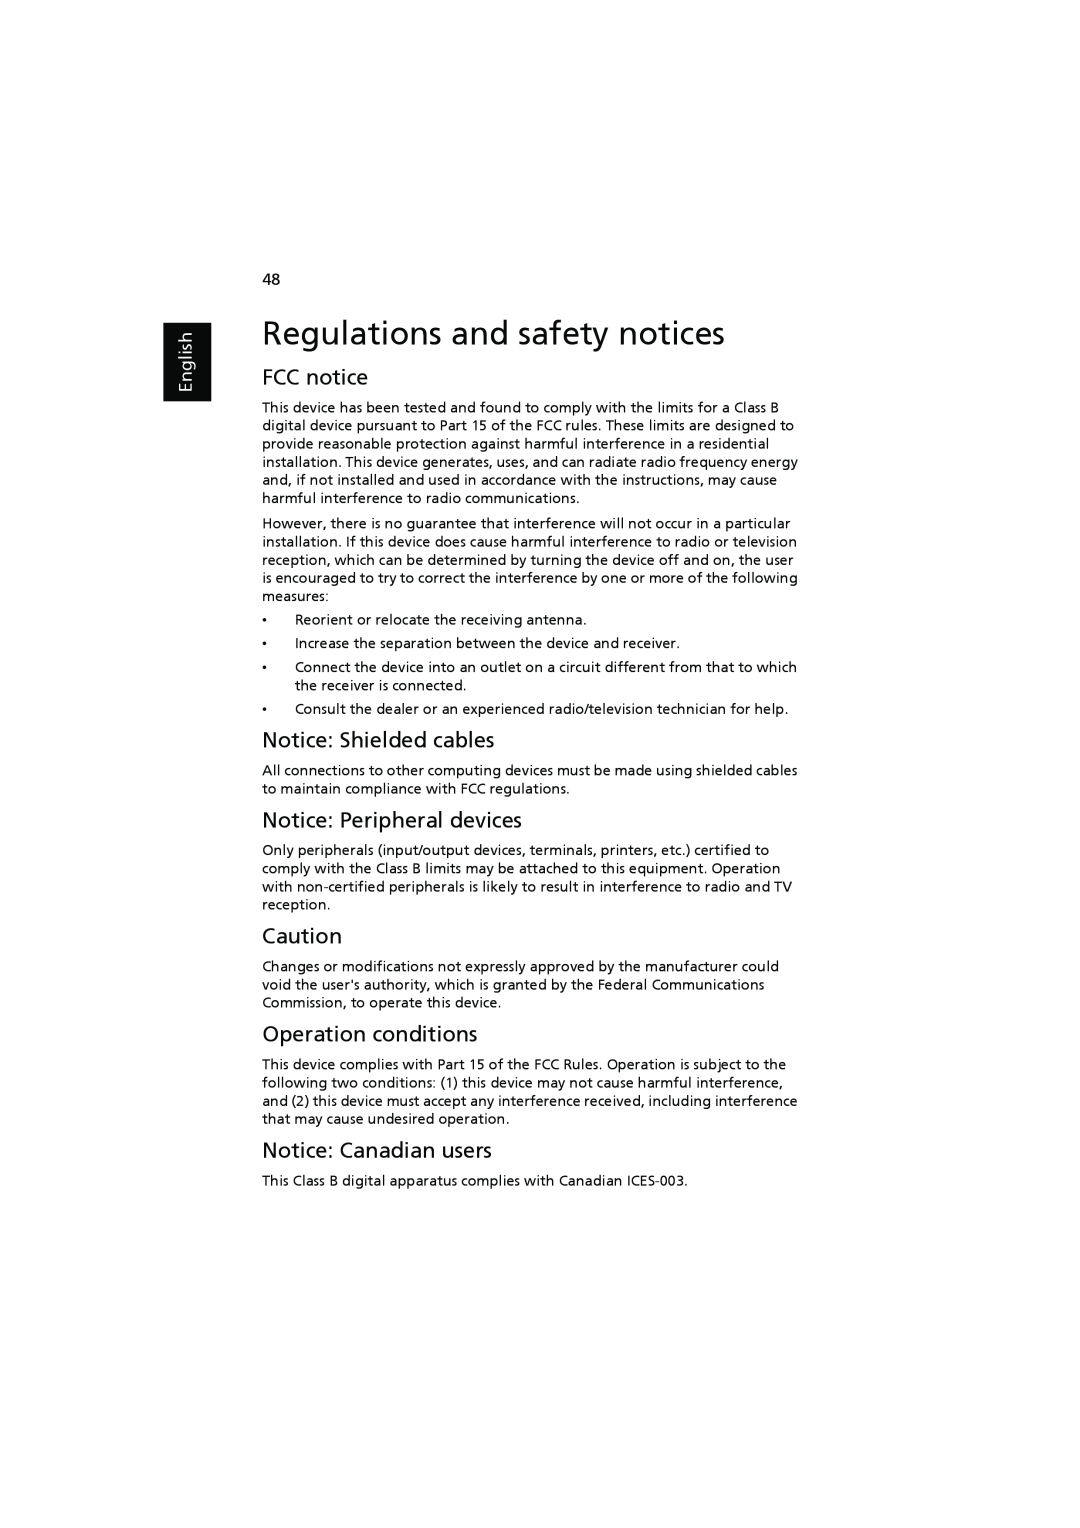 Acer P7205, P7200i Regulations and safety notices, FCC notice, Notice Shielded cables, Notice Peripheral devices, English 